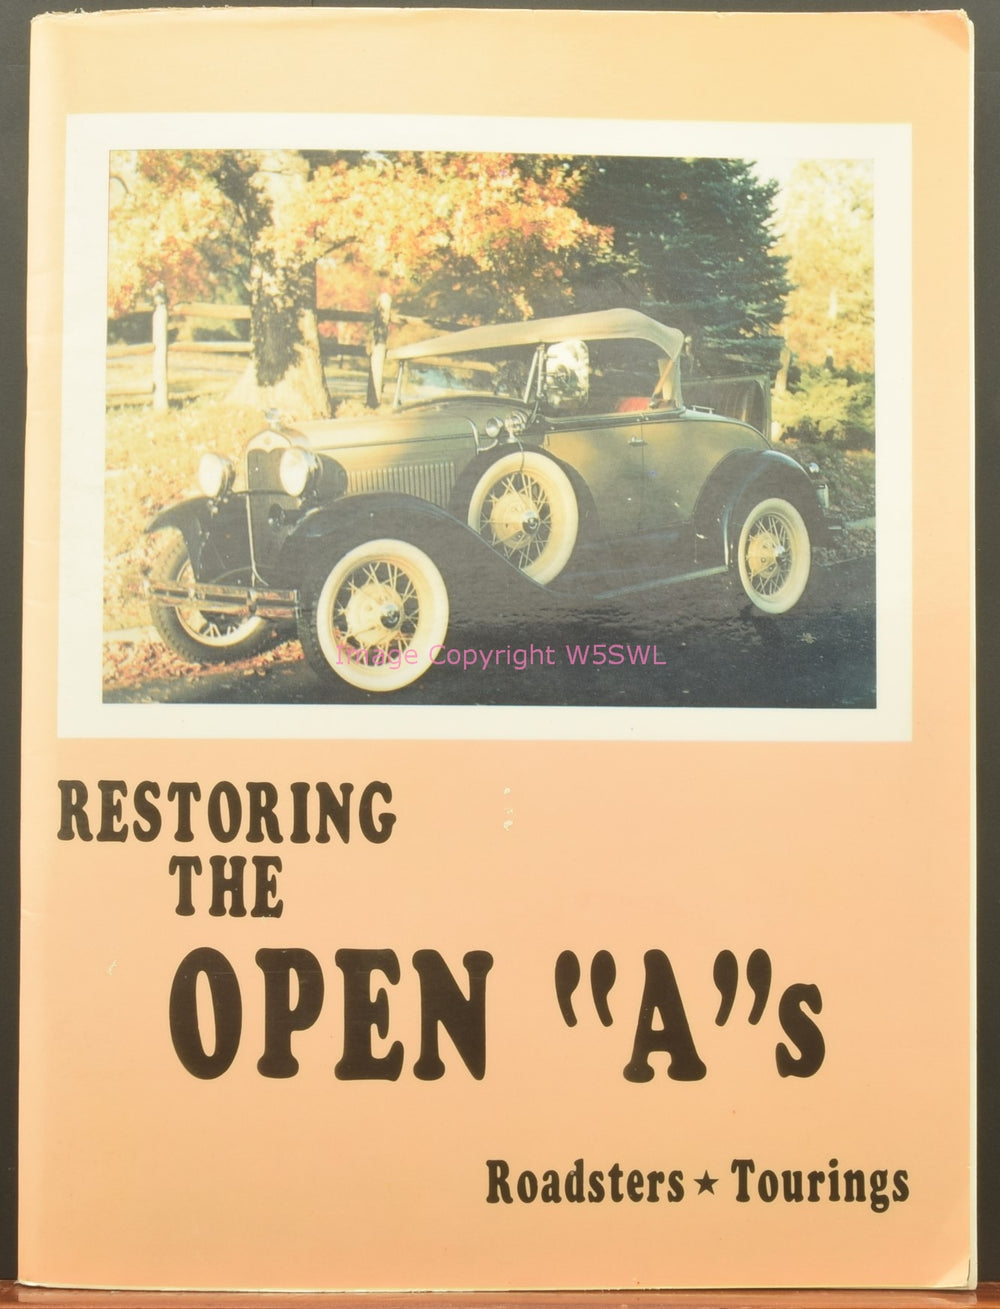 Restoring the Open "A"s Roadsters Tourings Mack Hils - Dave's Hobby Shop by W5SWL